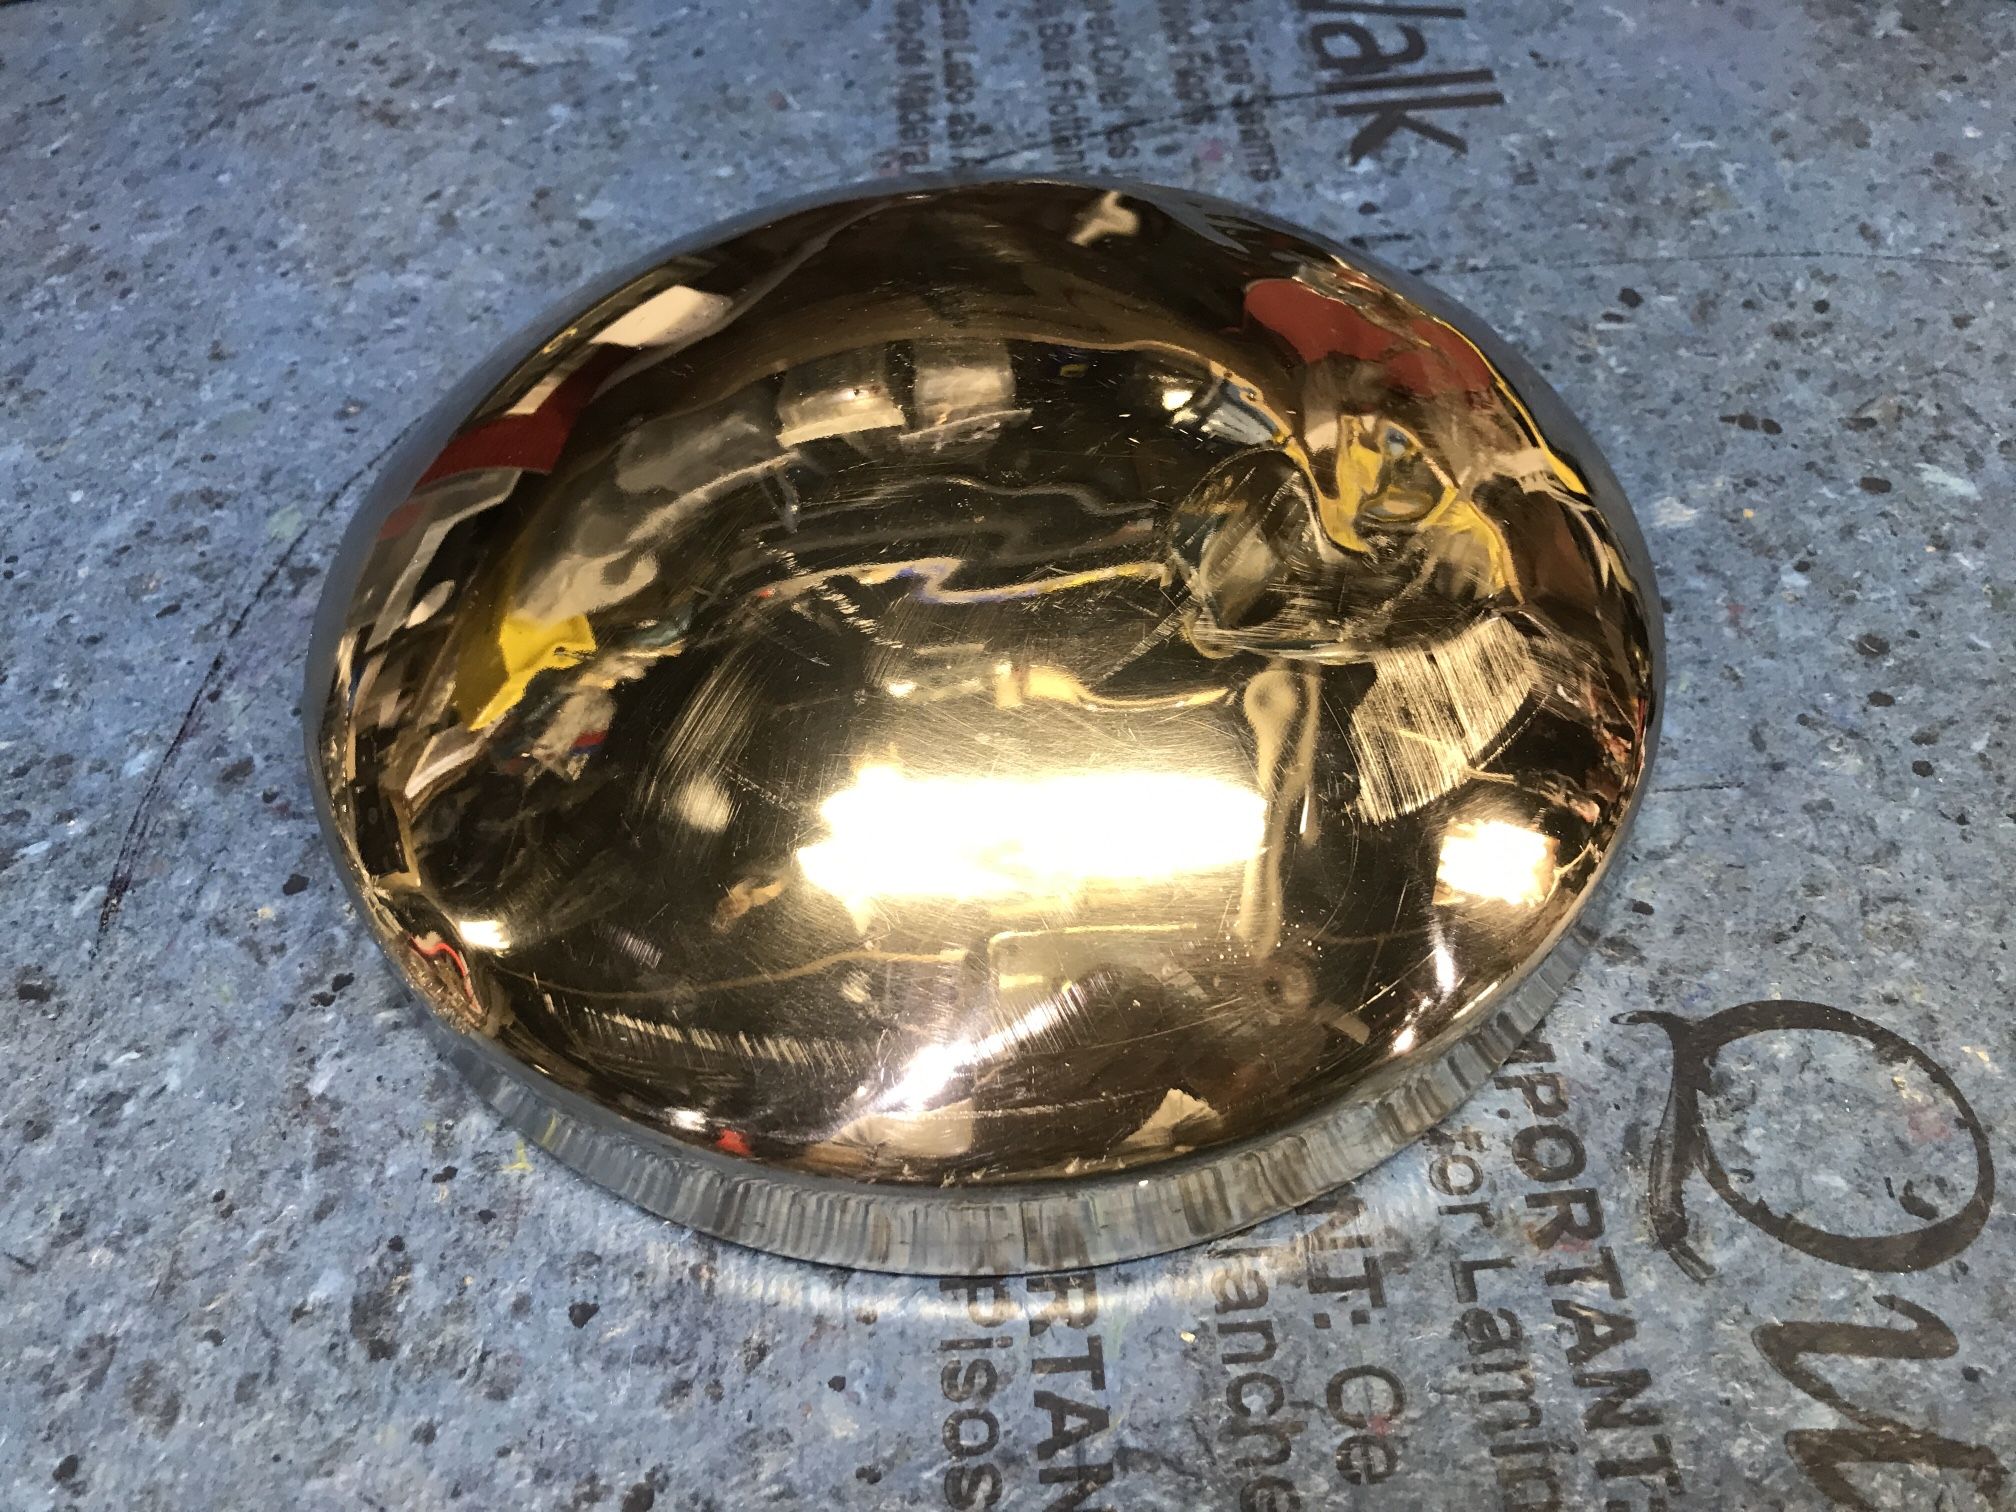 8" CHROME Dome Style Kenworth Peterbilt Truck Rear Hub Cap Wheel Cover. ONLY ONE